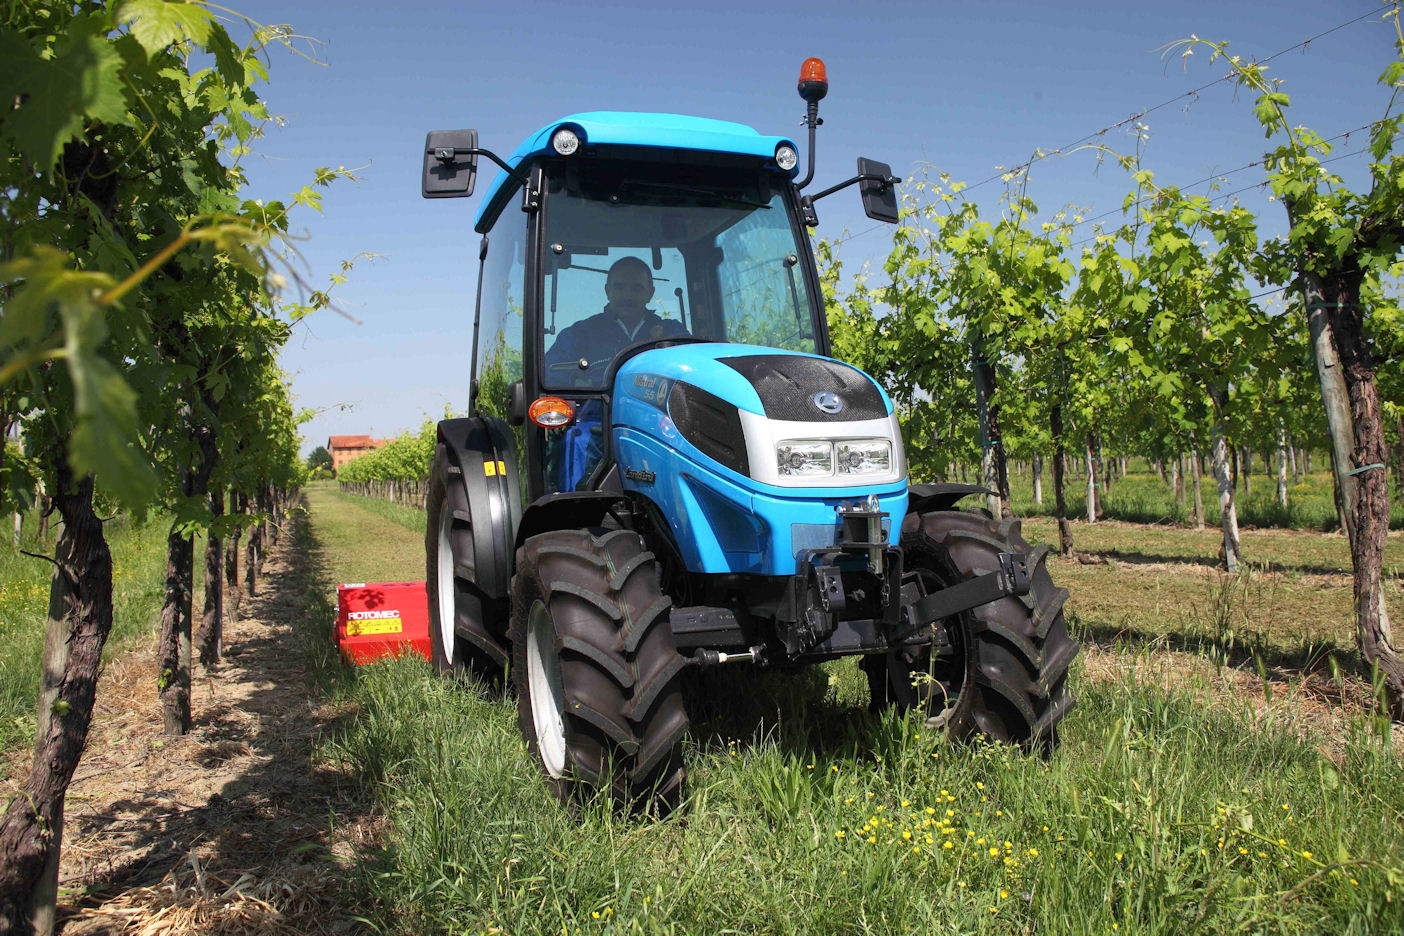 Landini Mistral compact is popular for mowing and pulling ‘fruit trains’.